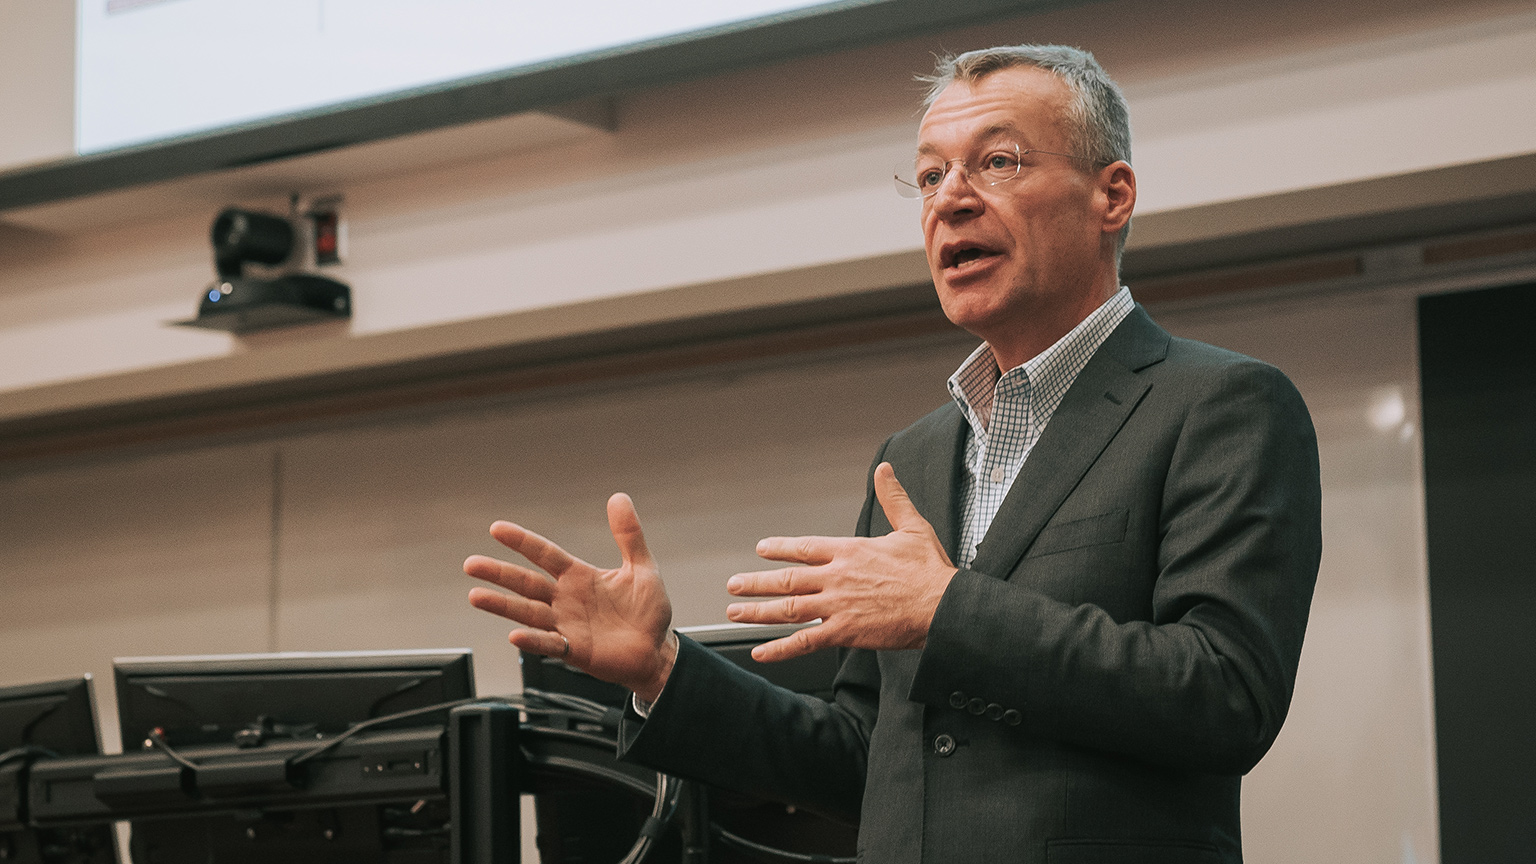 Stephen Elop talking with his hands at the innovation minor lecture